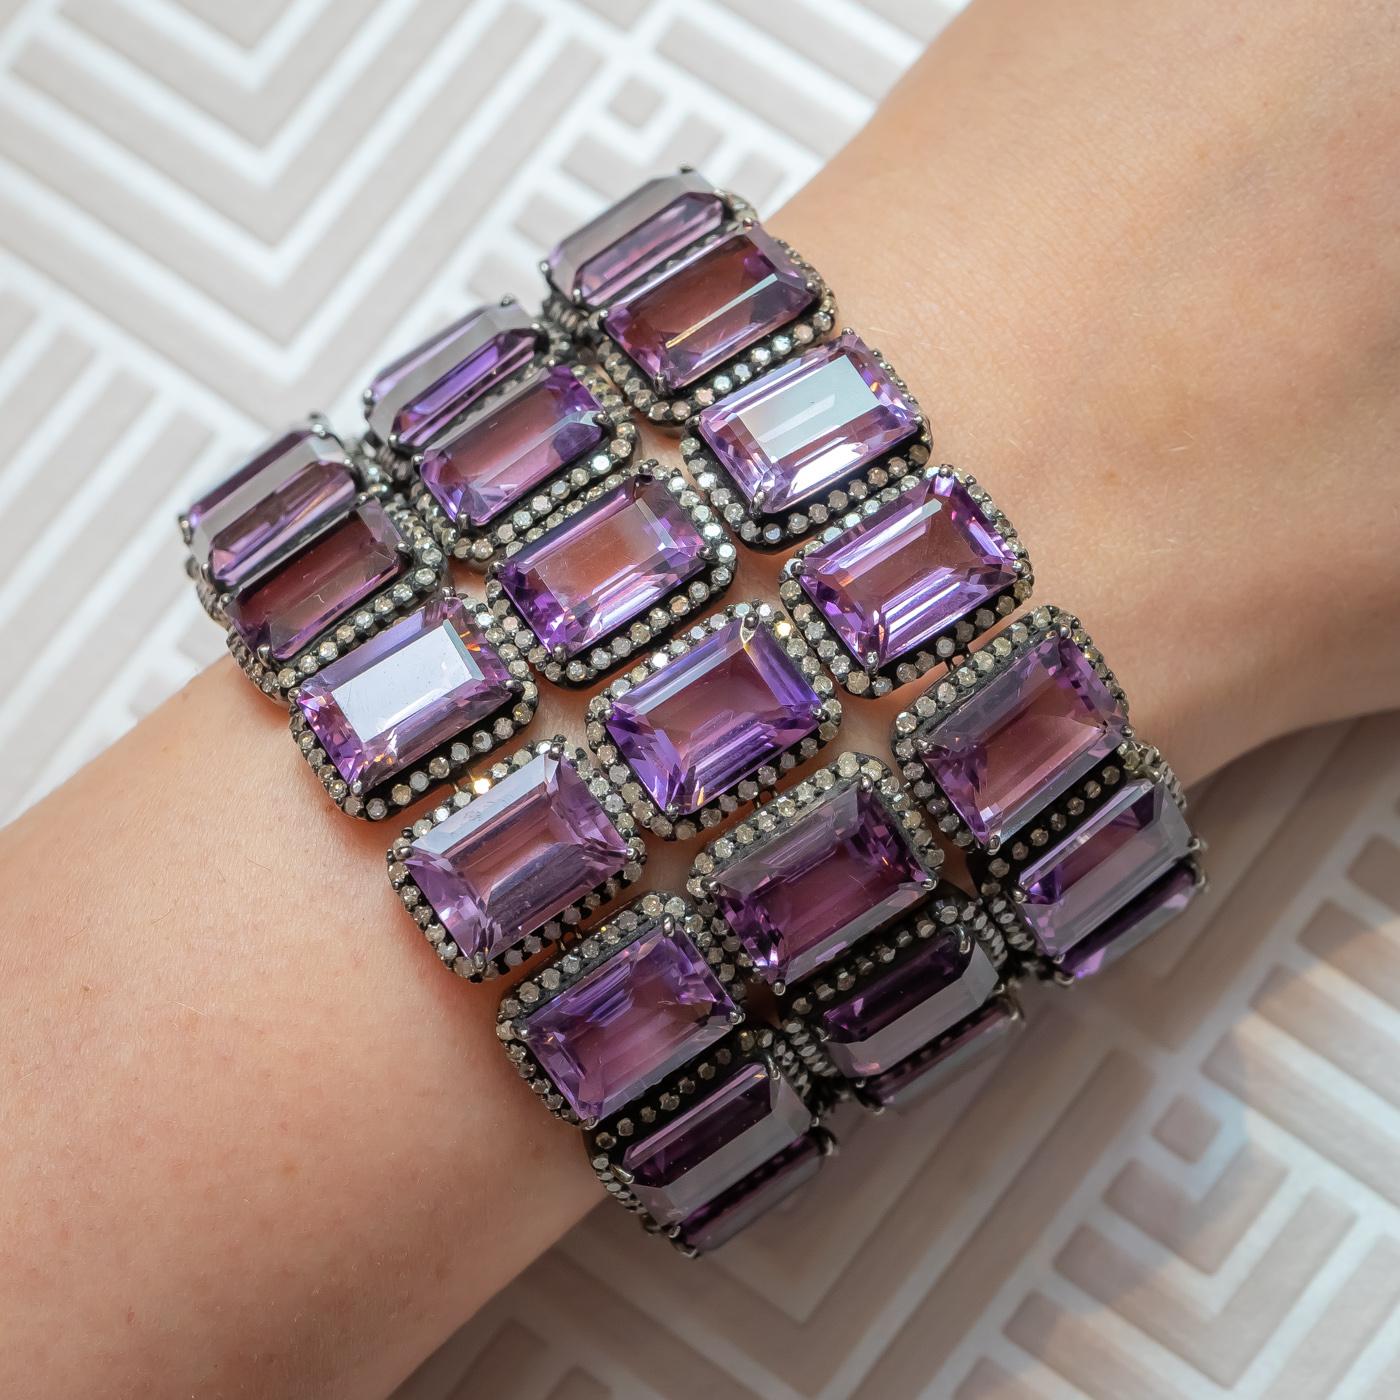 Amethyst bracelet, mounted in blackened  gold, set with emerald-cut amethysts weighing an estimated total of 279.94ct. each surrounded by a cluster of eight-cut diamonds, the clasp is pavé set with diamonds.